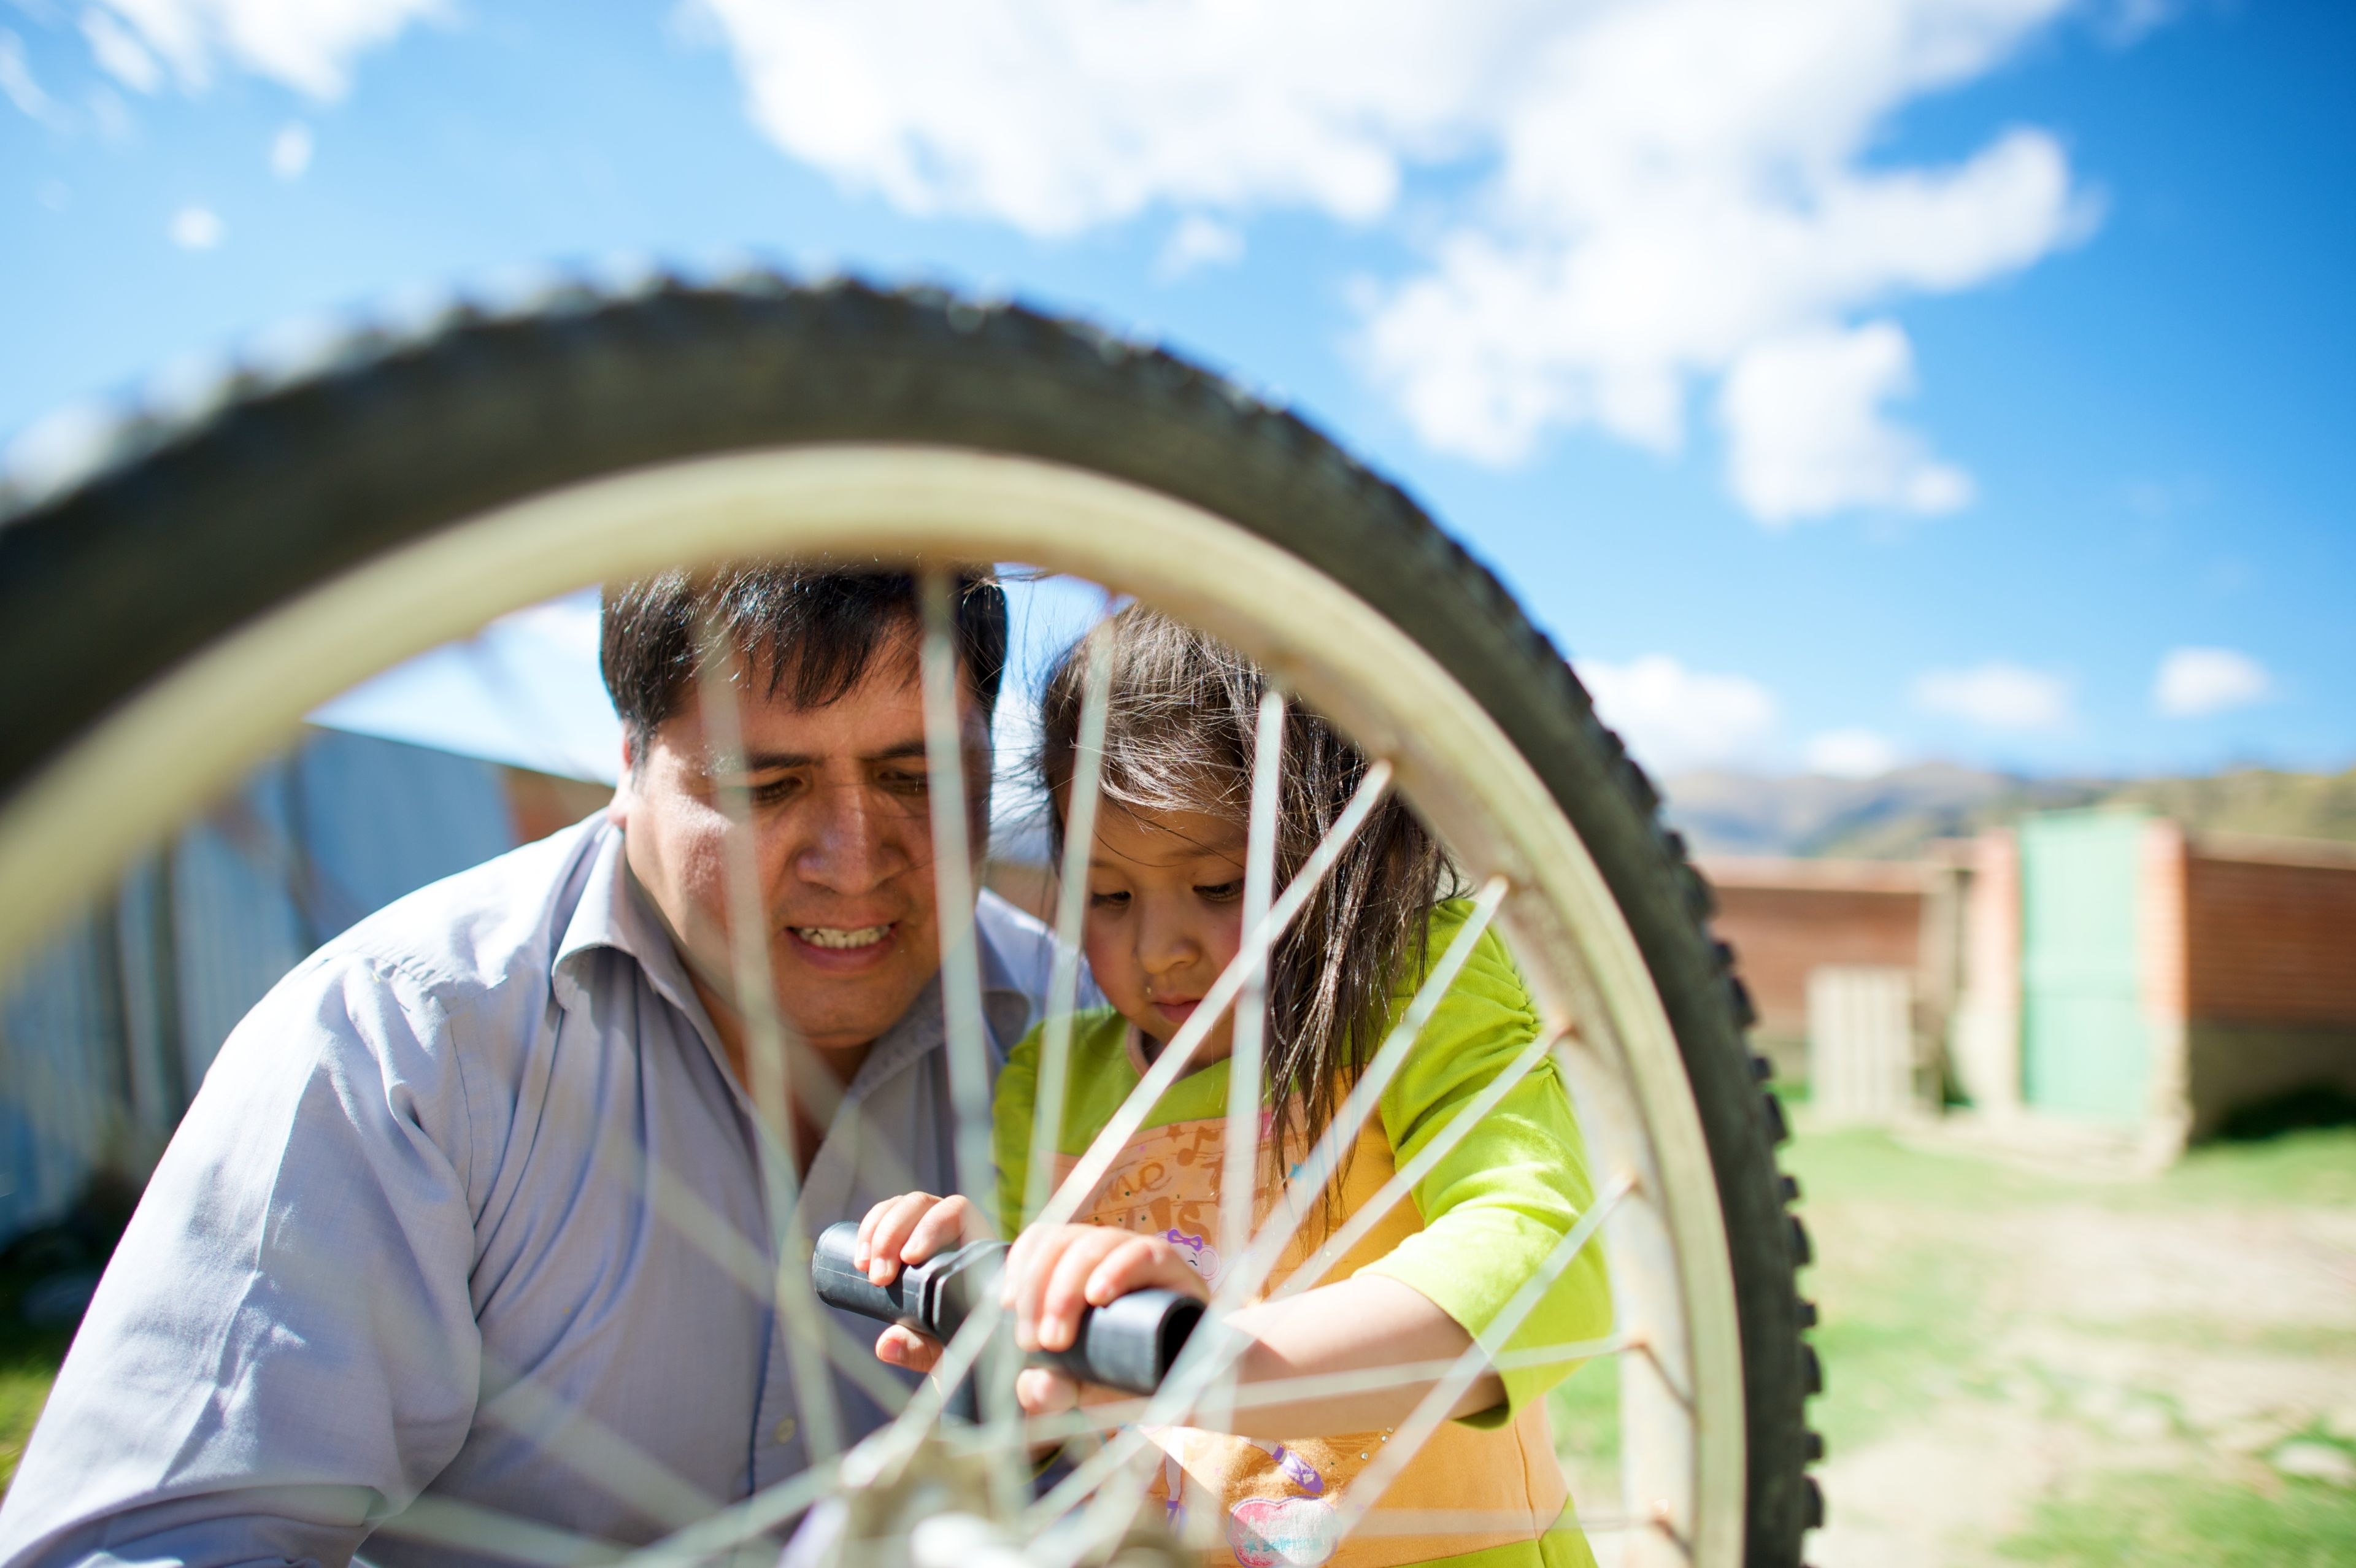 A man and his daughter sit outside and fix a bike together.